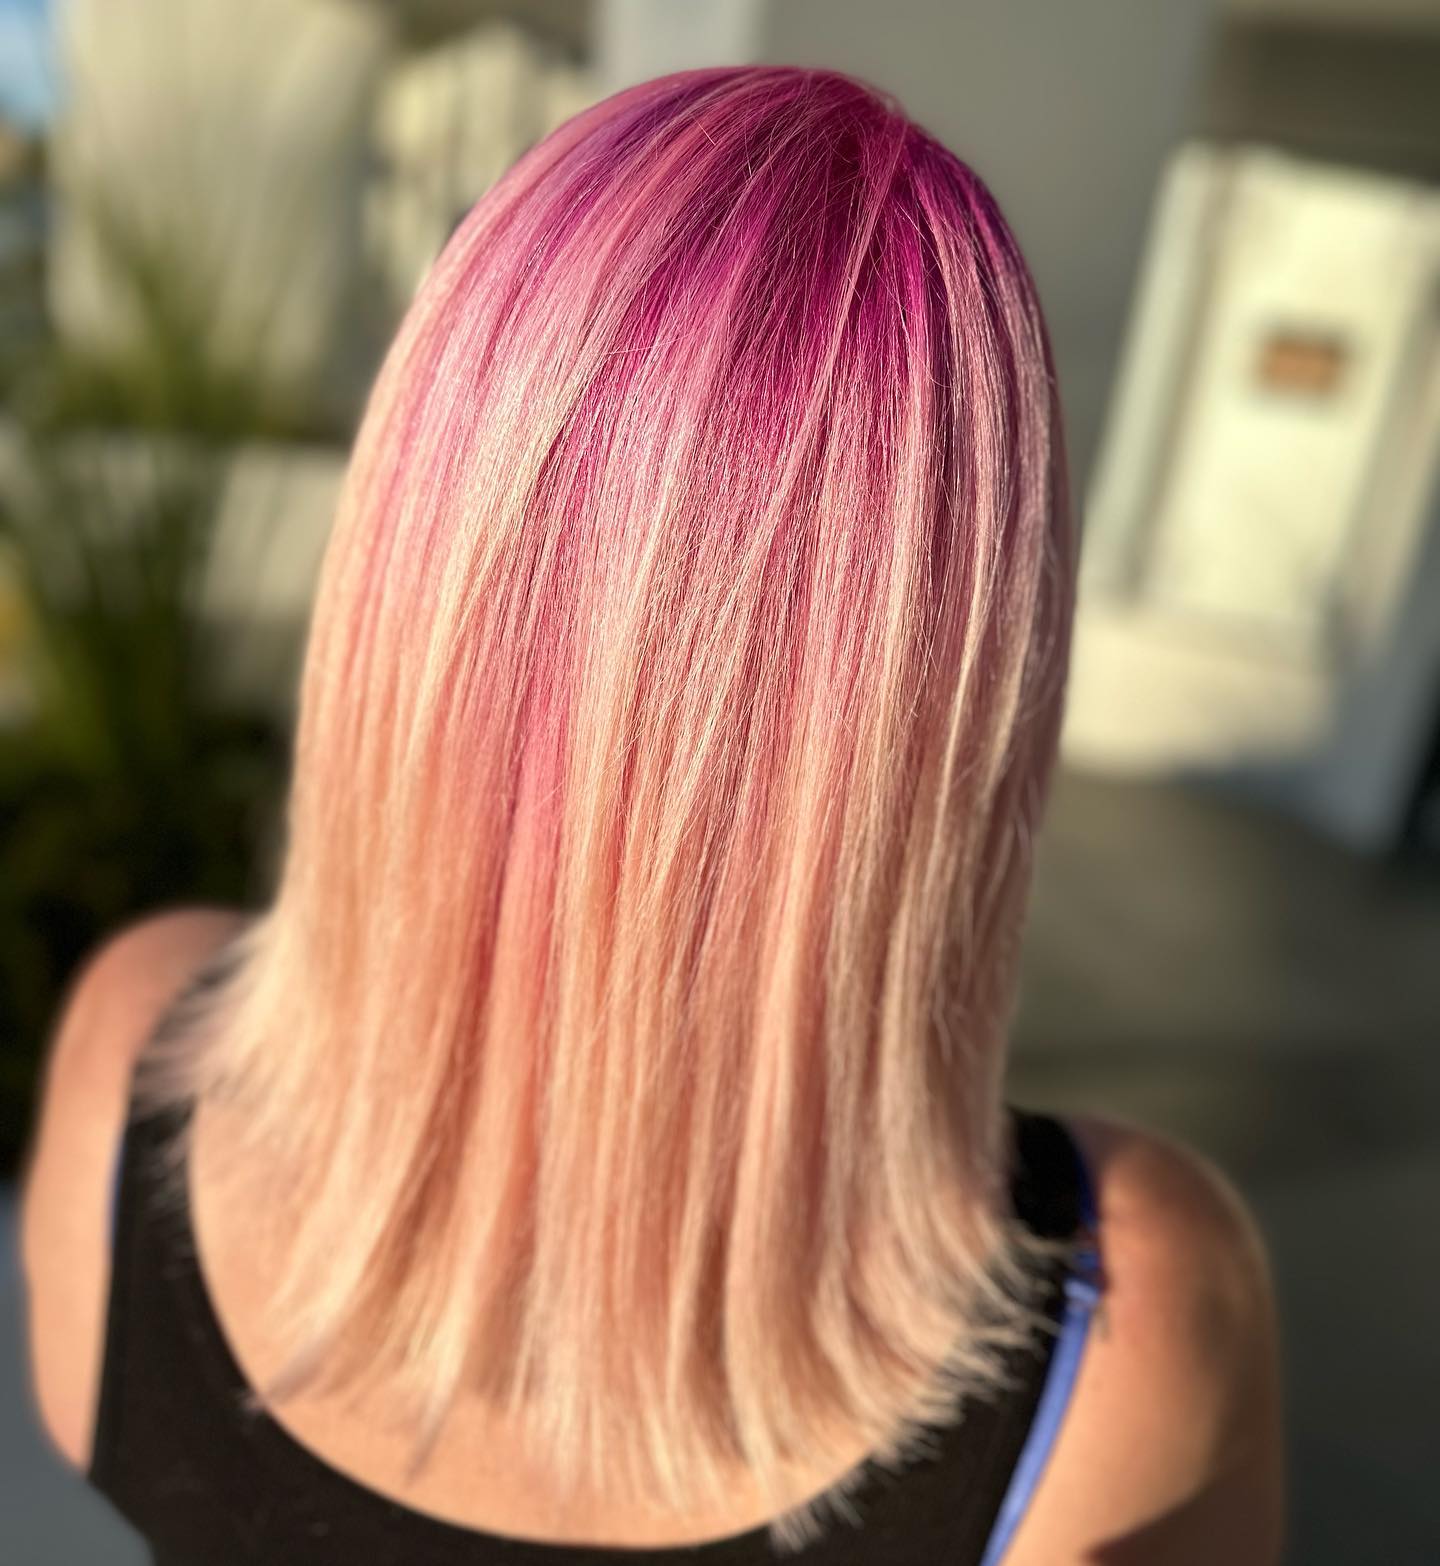 pink ombre hair color 56 Ombre pink hair blonde | Pastel pink ombre hair | Pink balayage Hair Pink Ombre Hair Color for Women